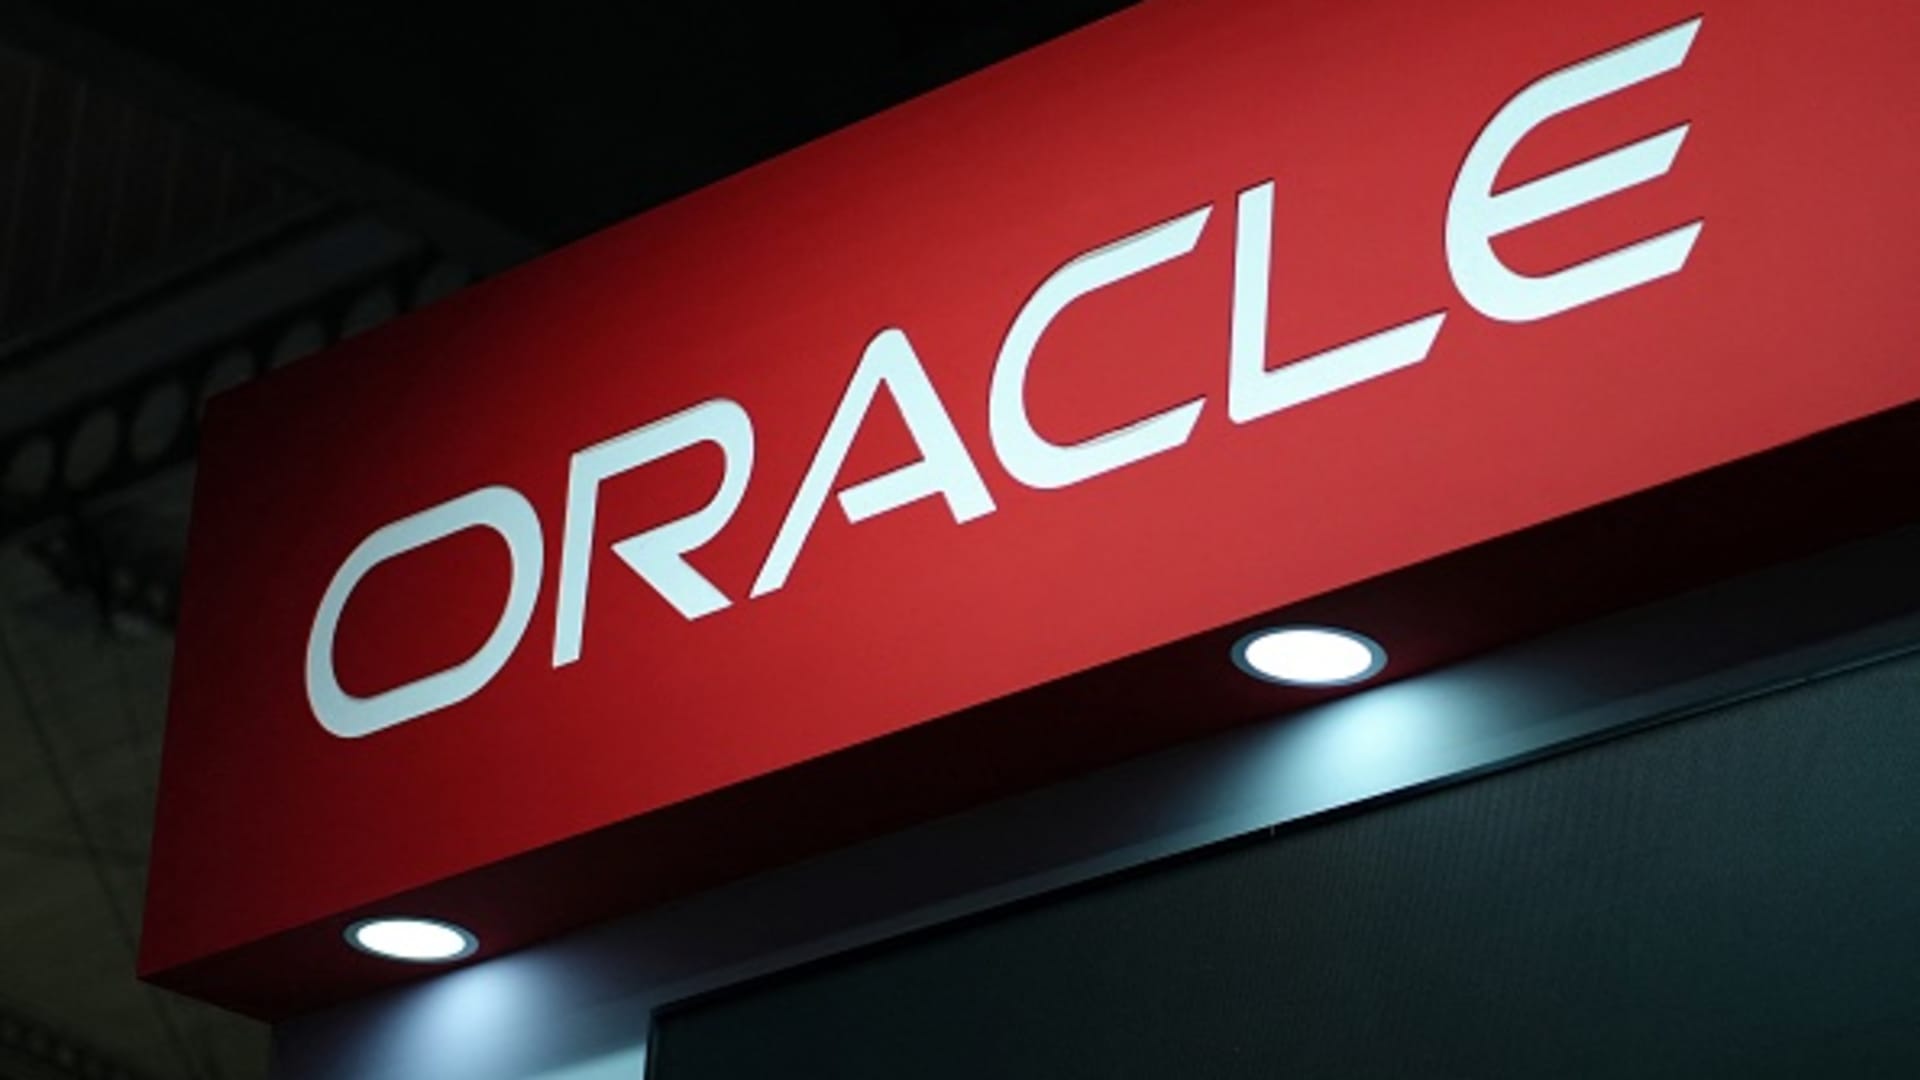 Oracle boosts generative AI capabilities as cloud competition intensifies [Video]